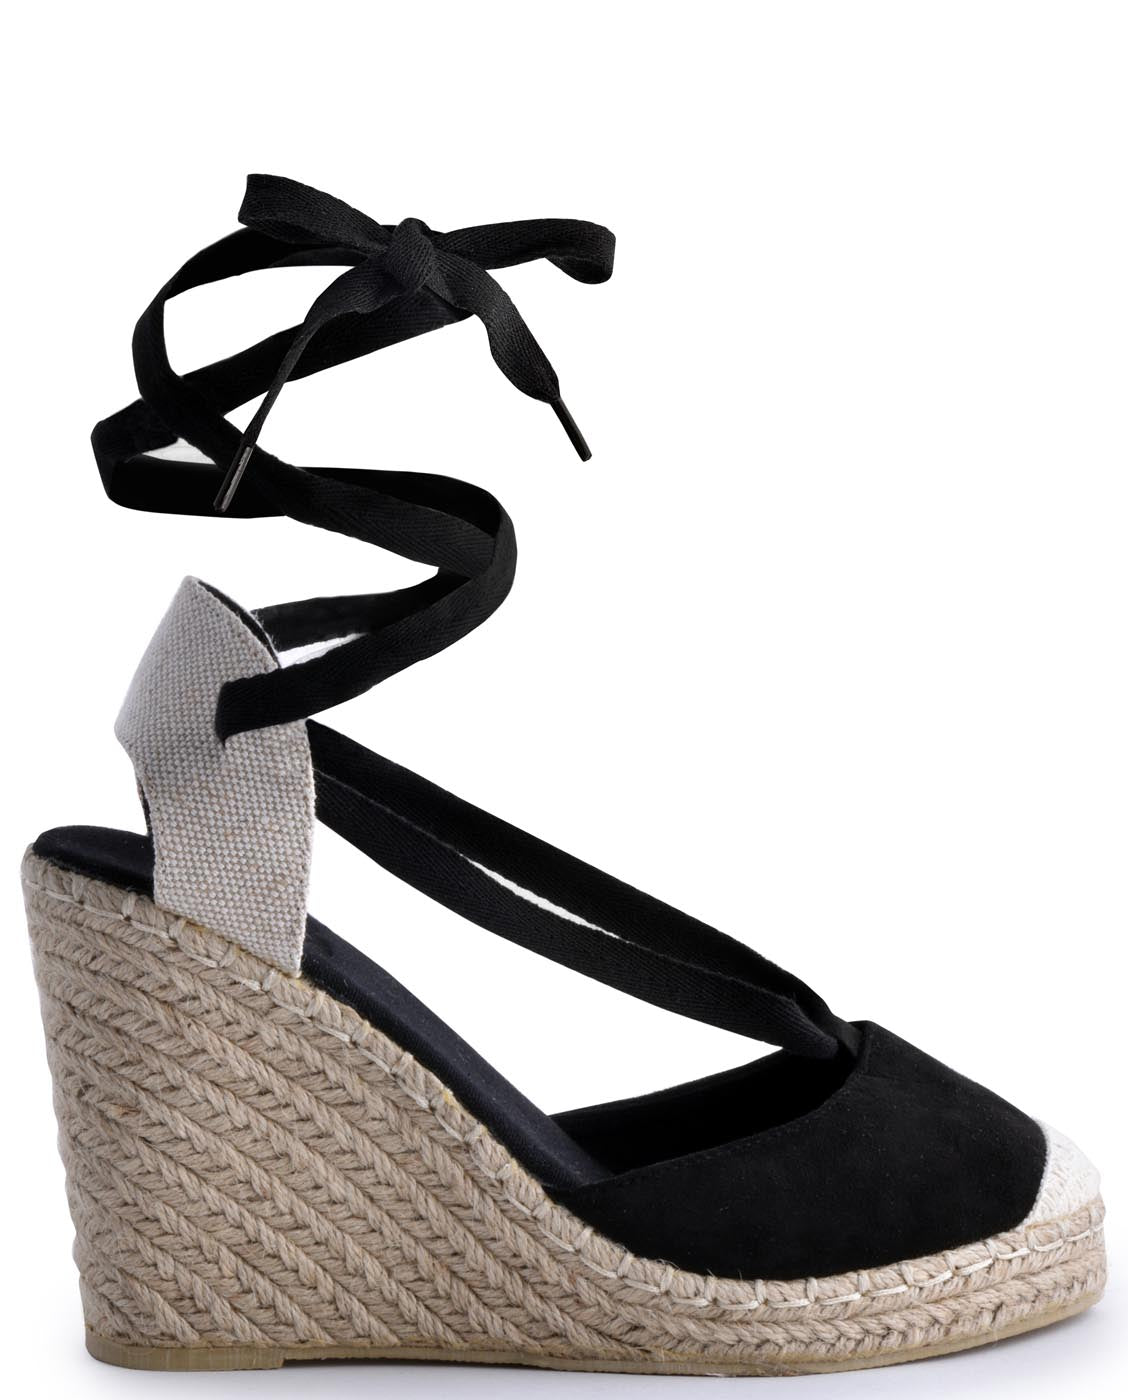 Espadrille Wedges Sandals - Fashion You Up